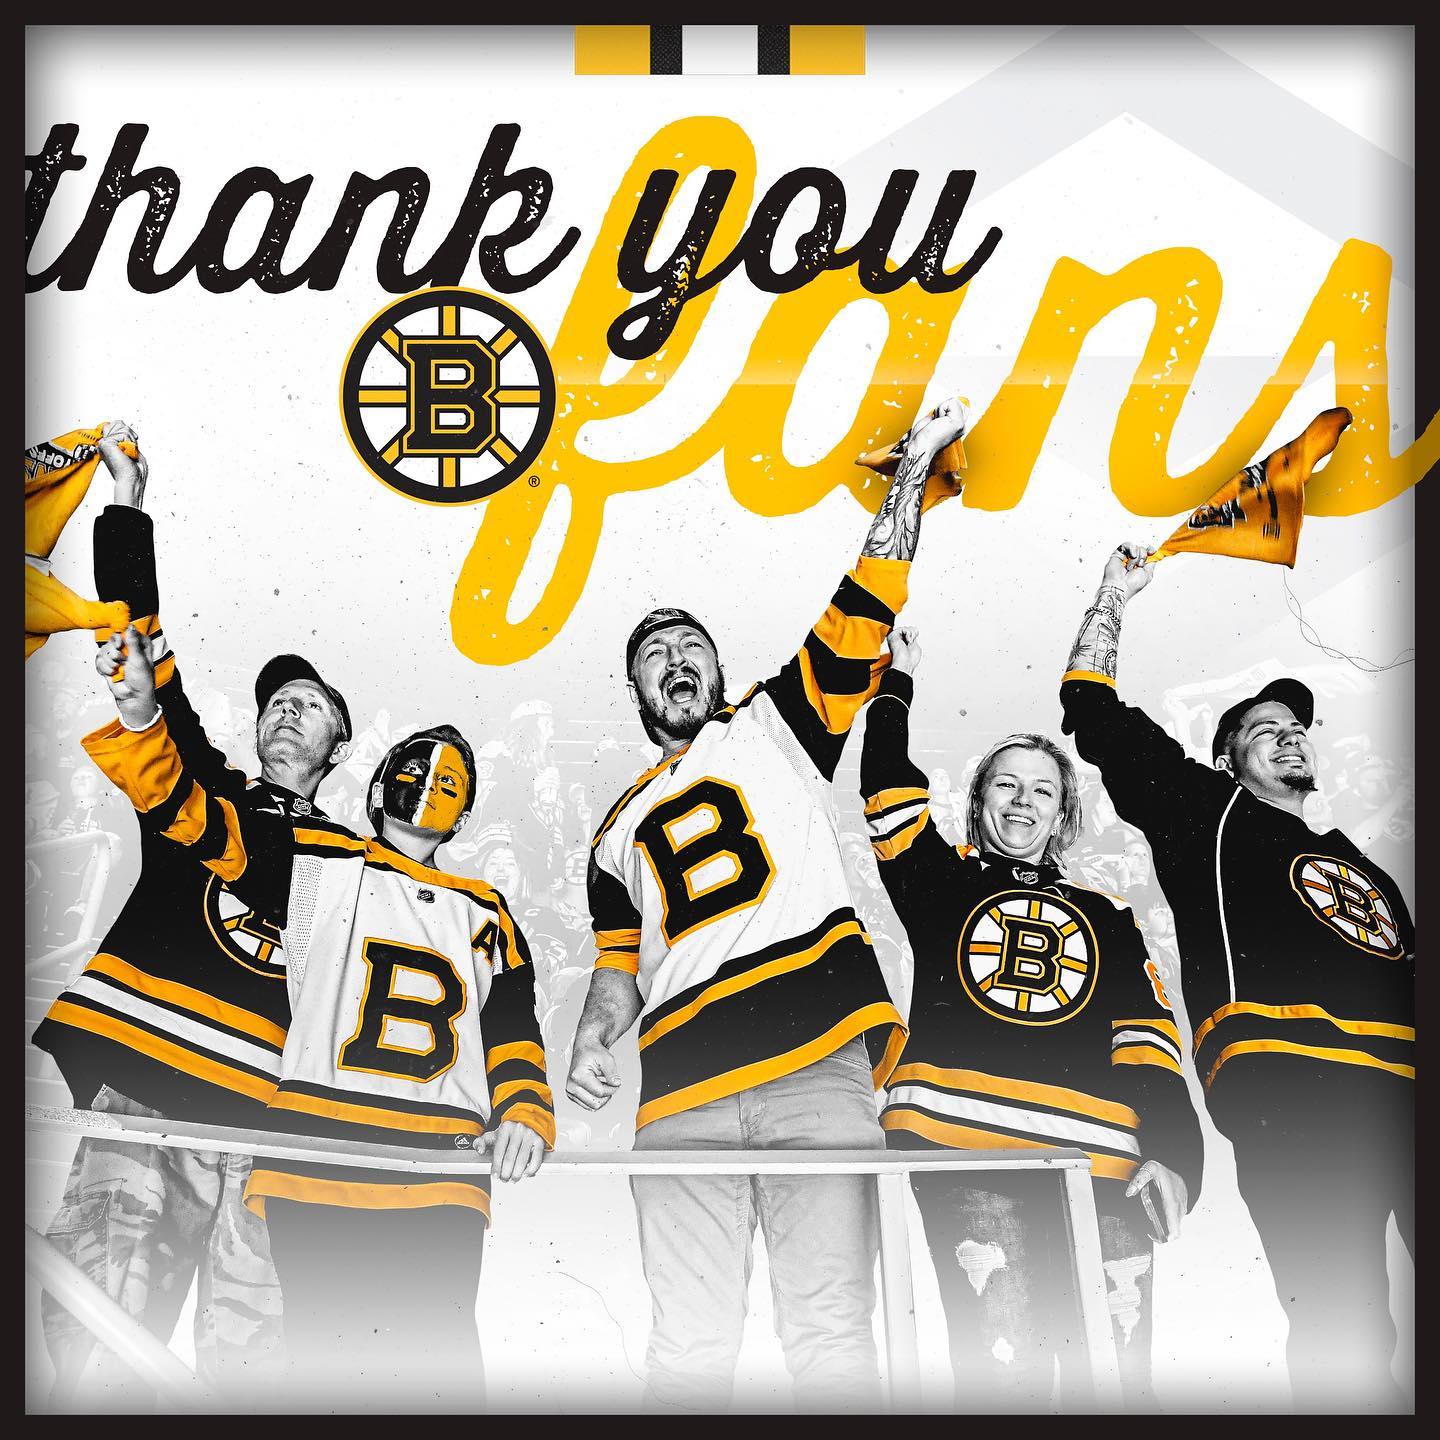 To the greatest fans in hockey:  Once again, your passion and support was unwave...